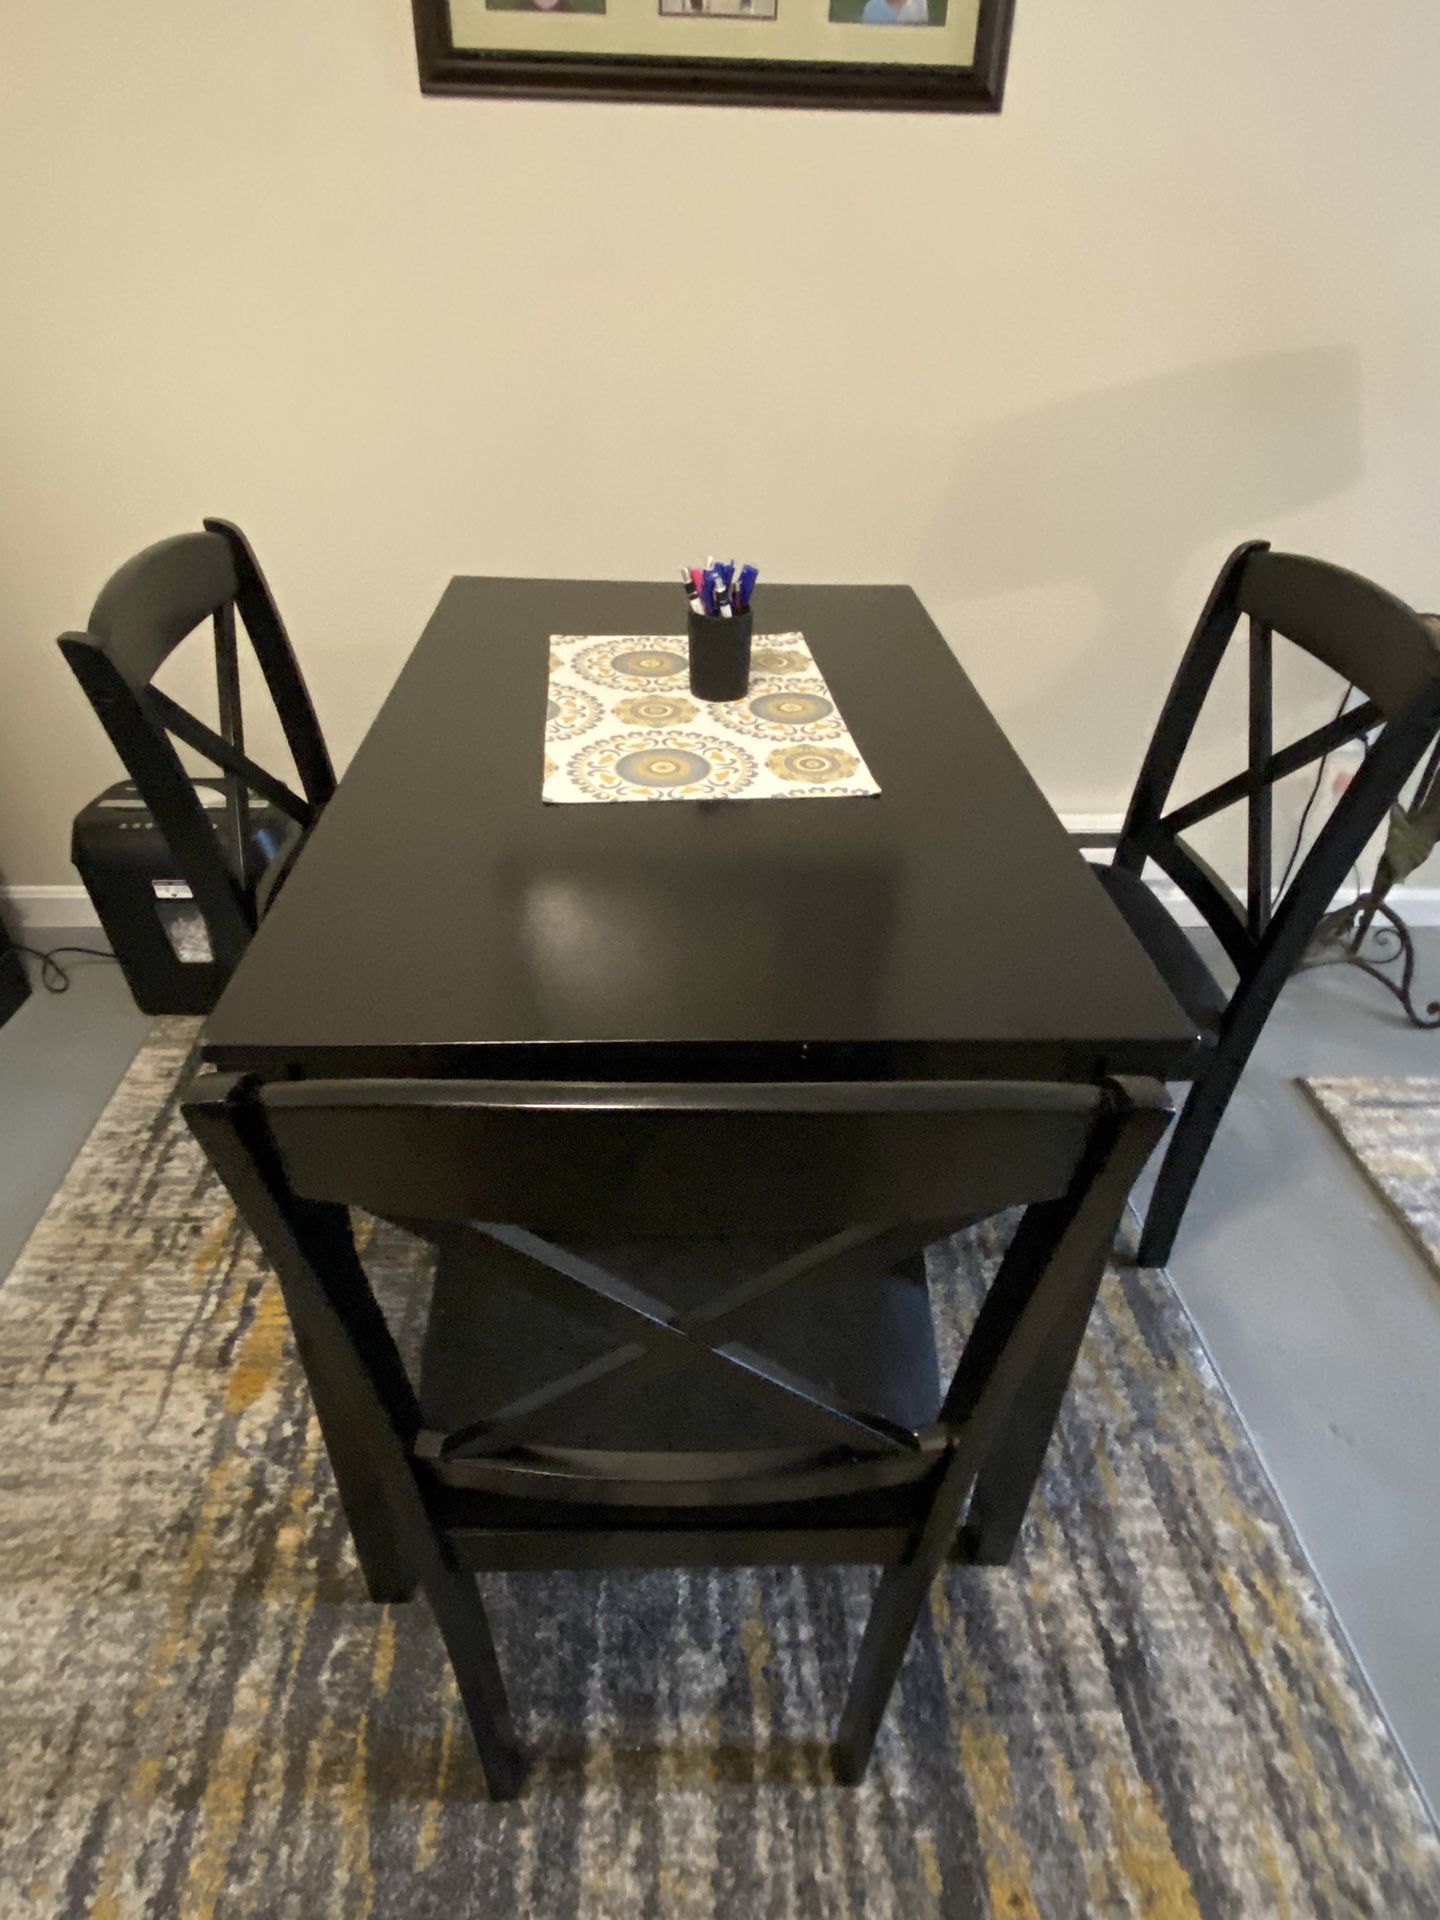 Table And Three Chairs